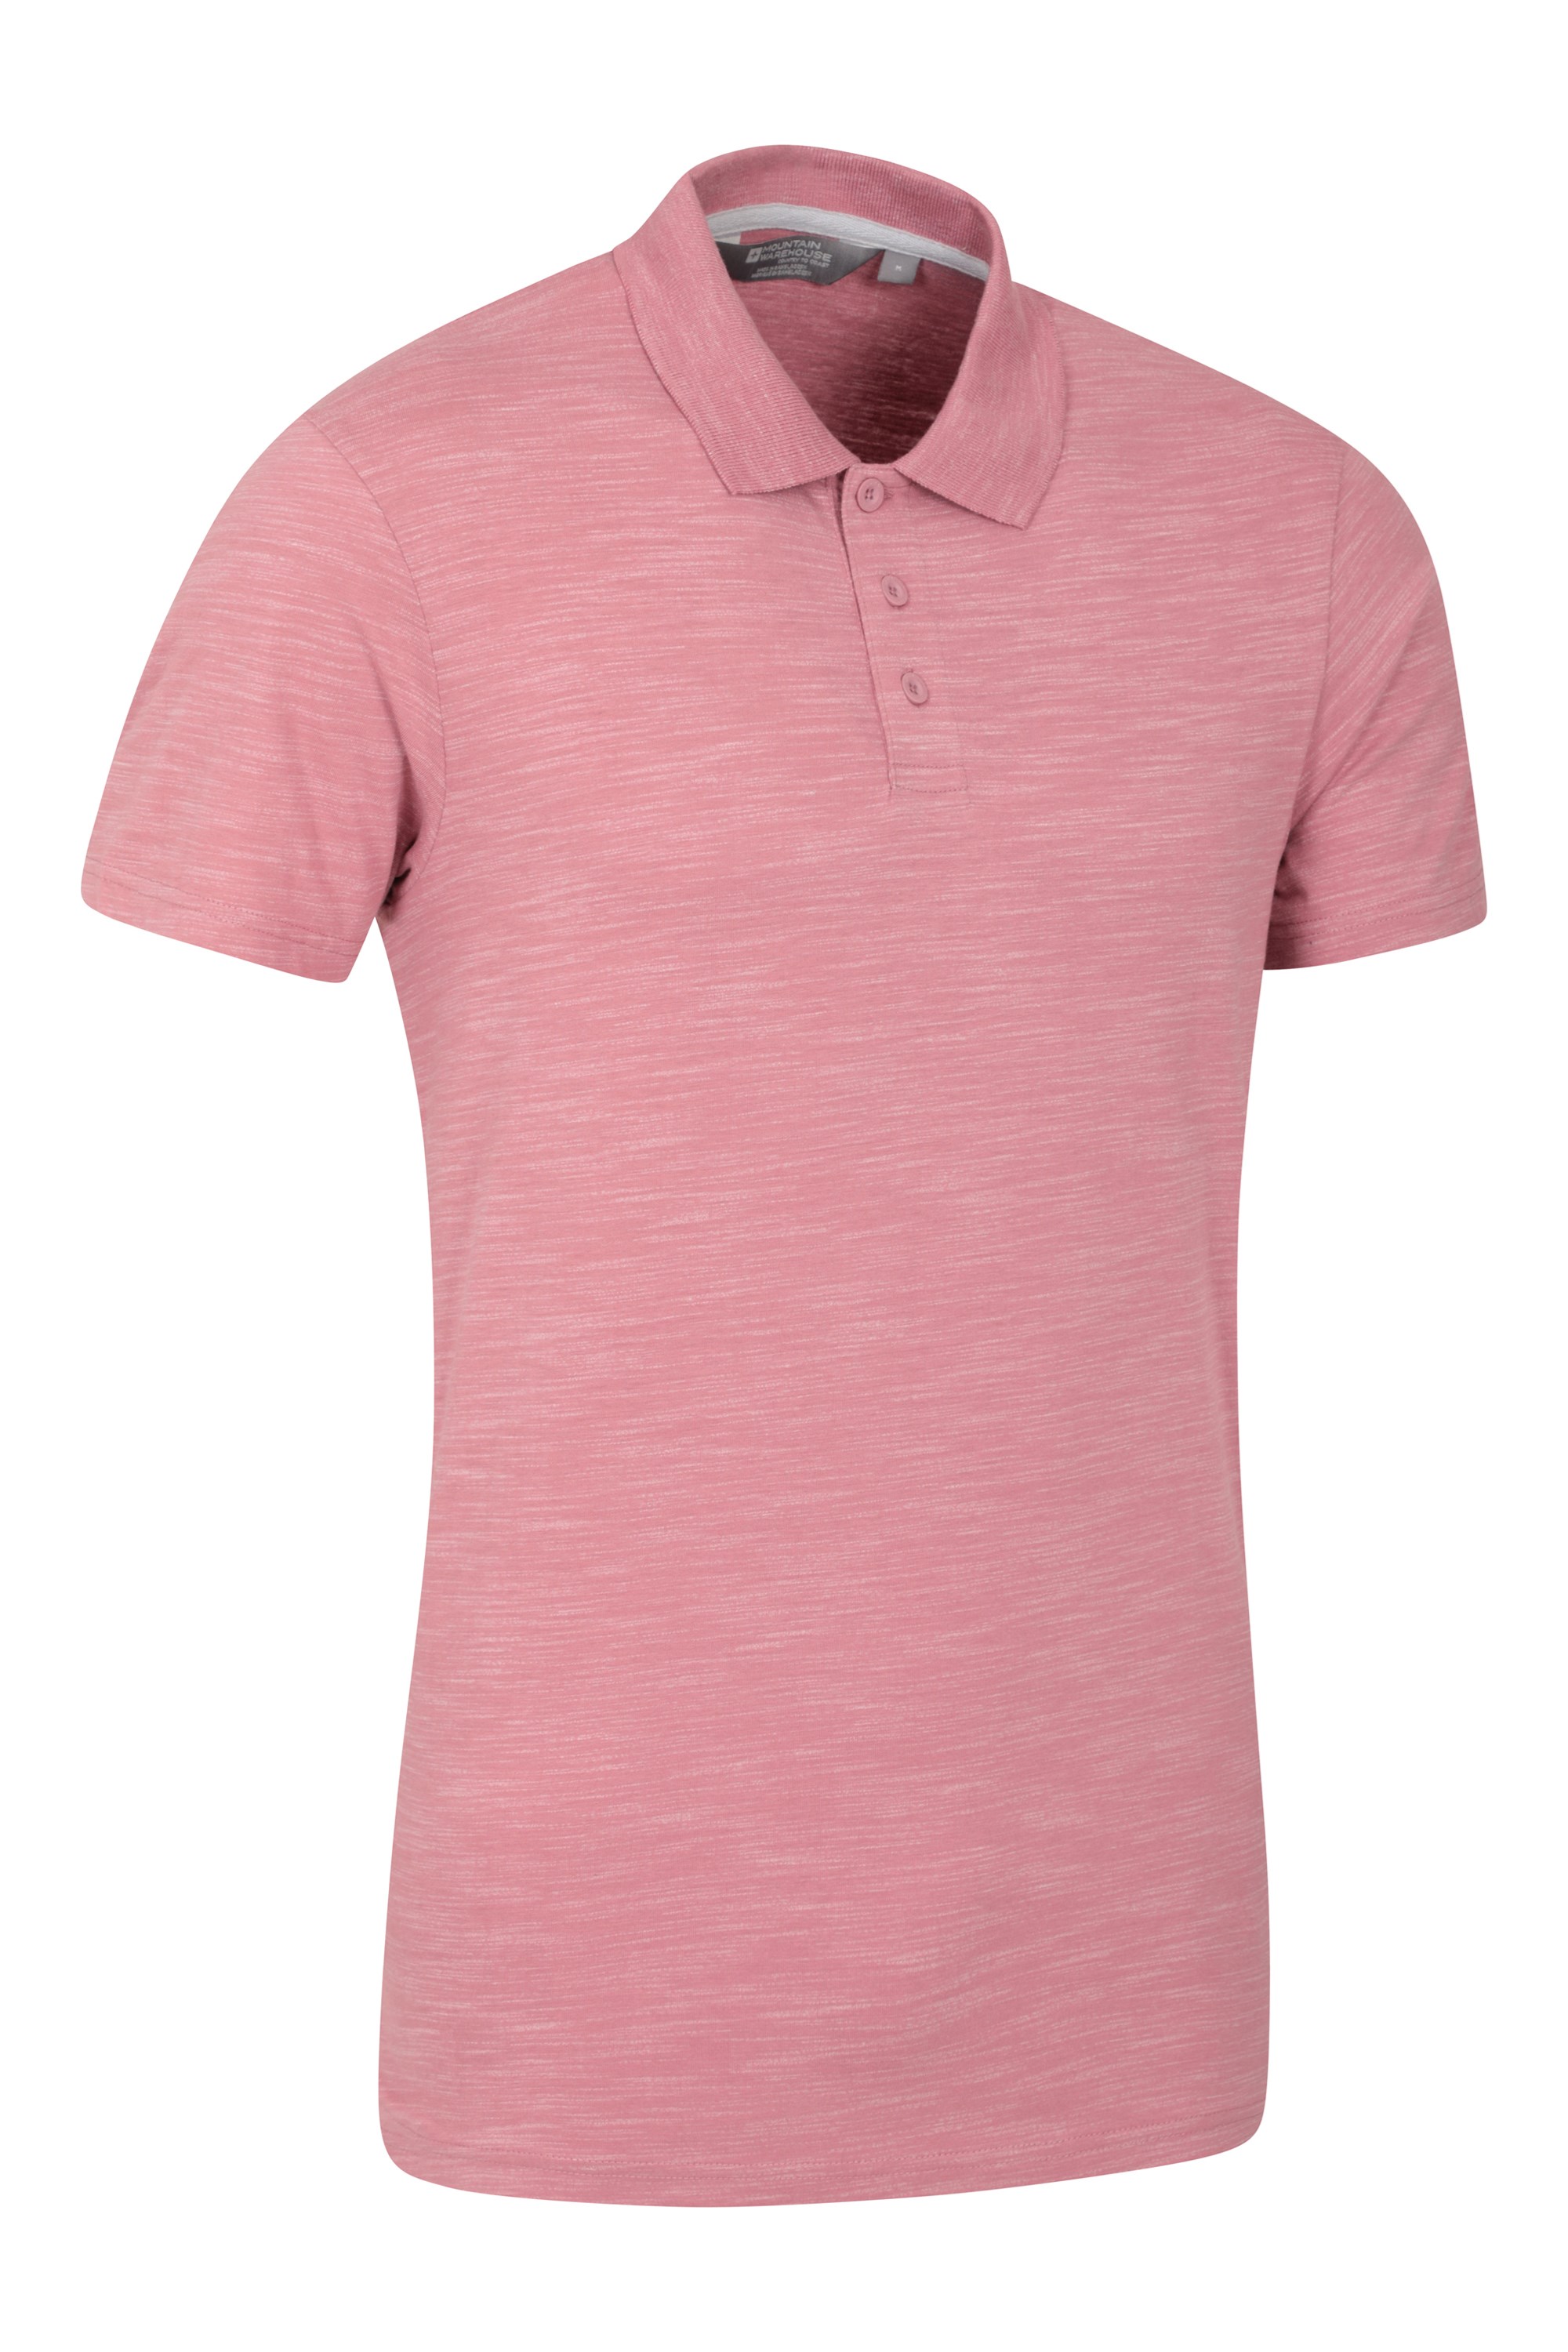 Hasst Mens Polo - Pink